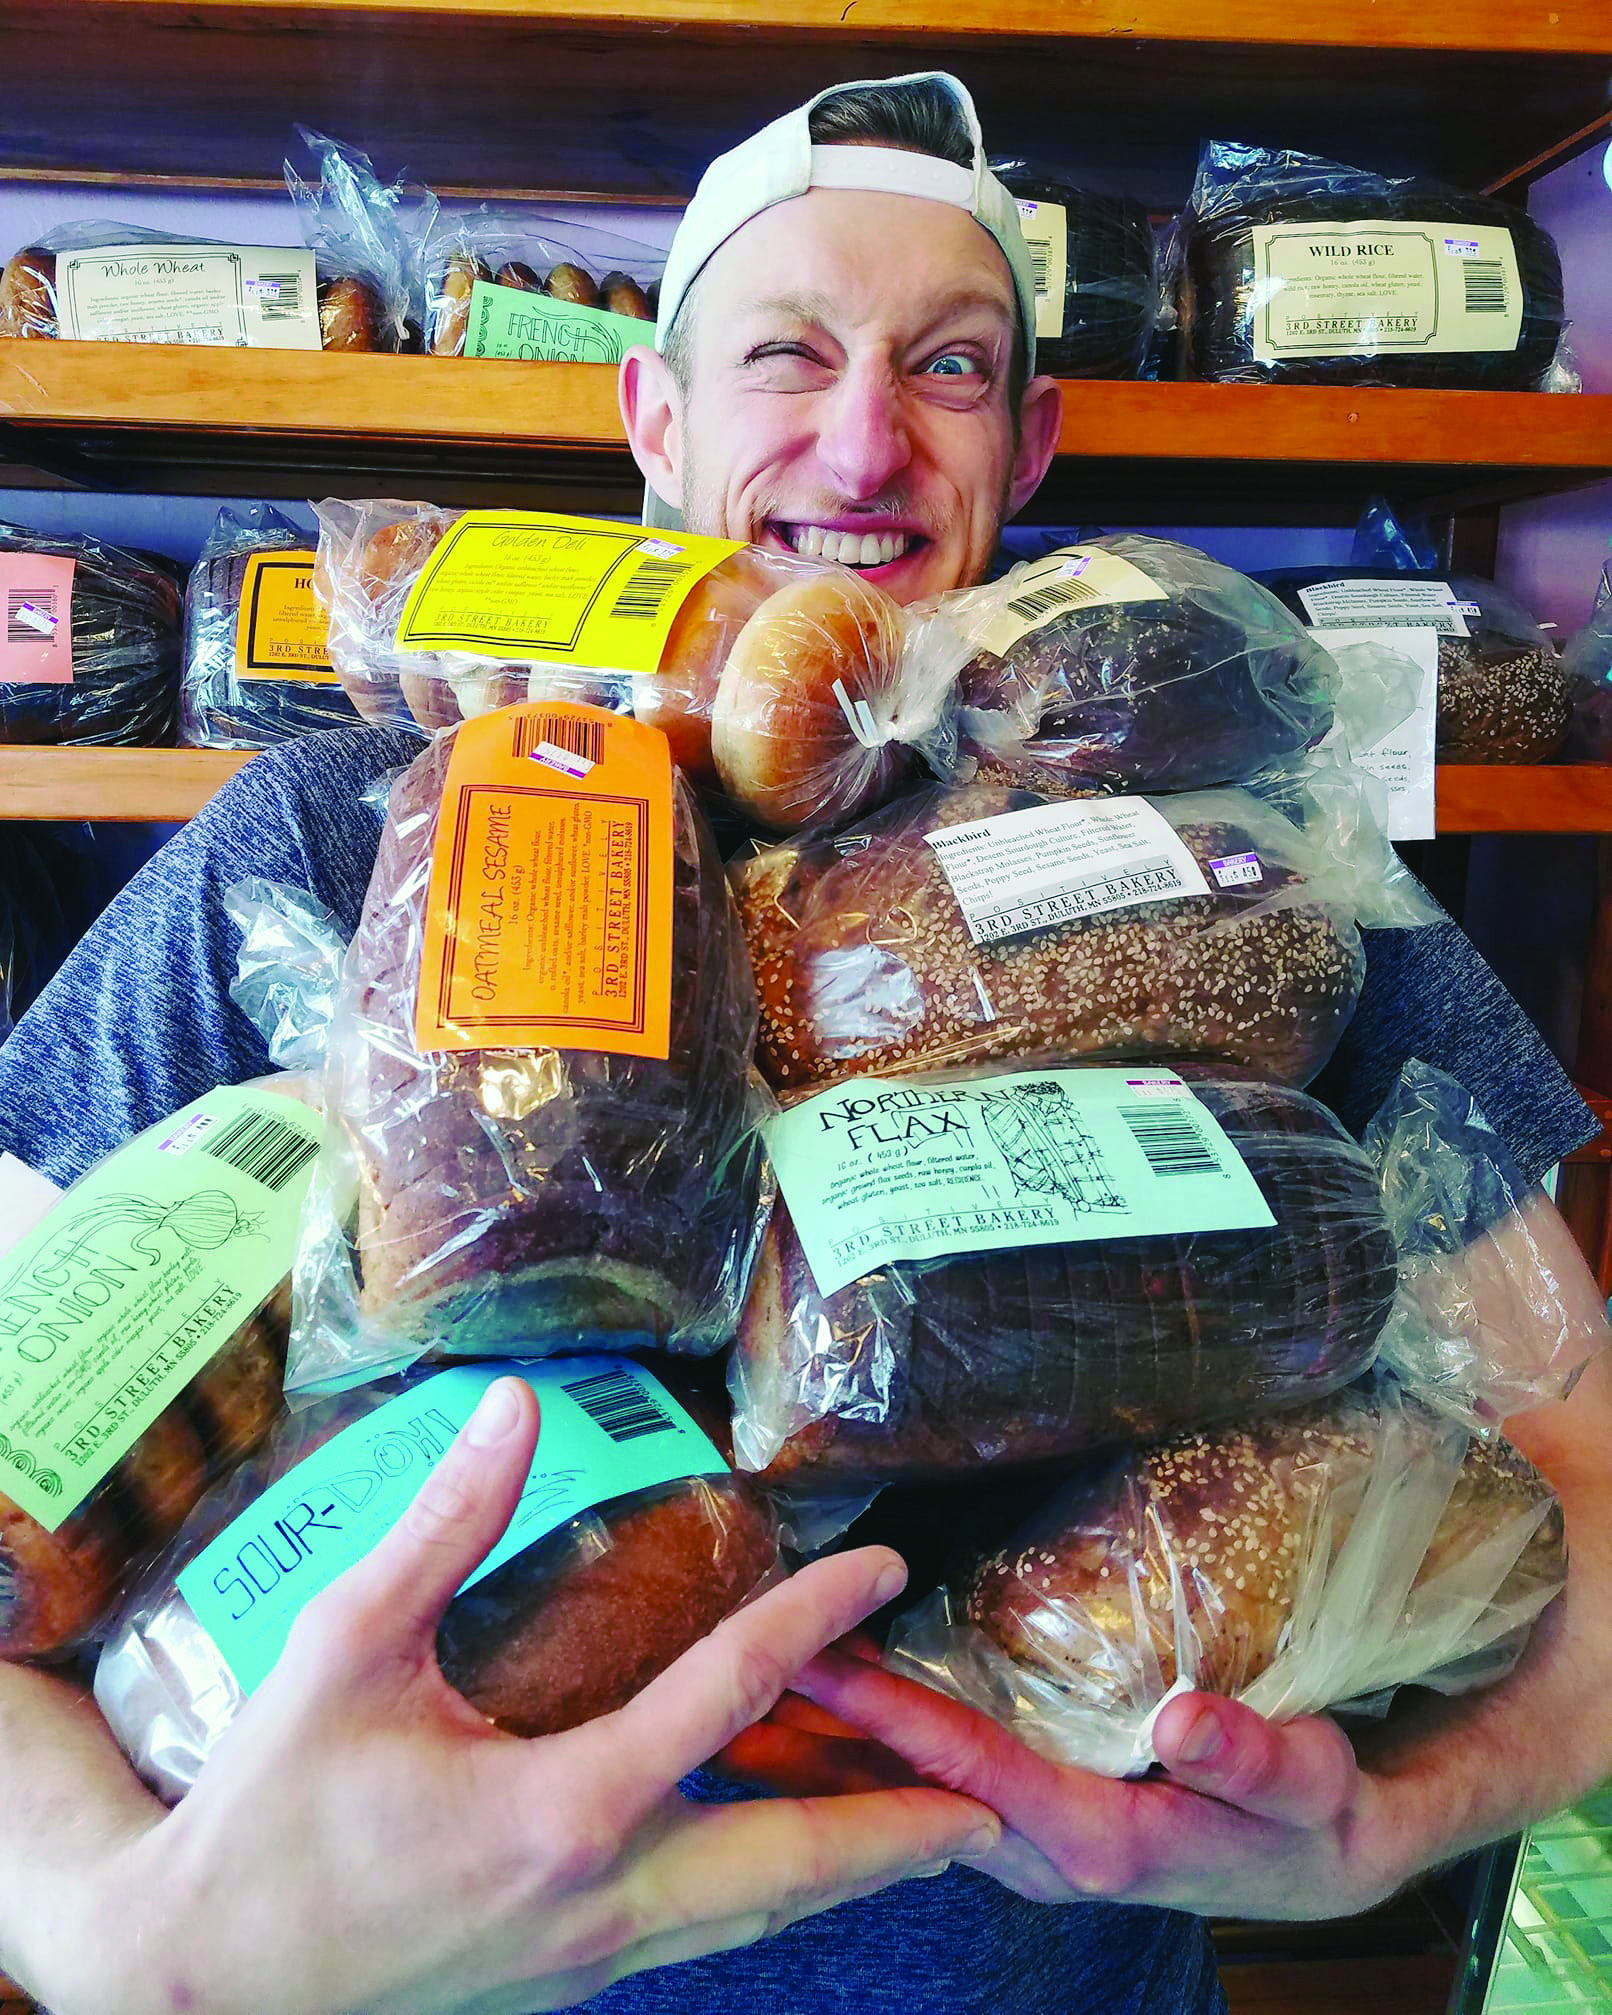 A person wearing a white cap backward is smiling while holding a large assortment of packaged bread. The background shows shelves filled with more bread, making it a perfect morning to enjoy some coffee in Duluth.